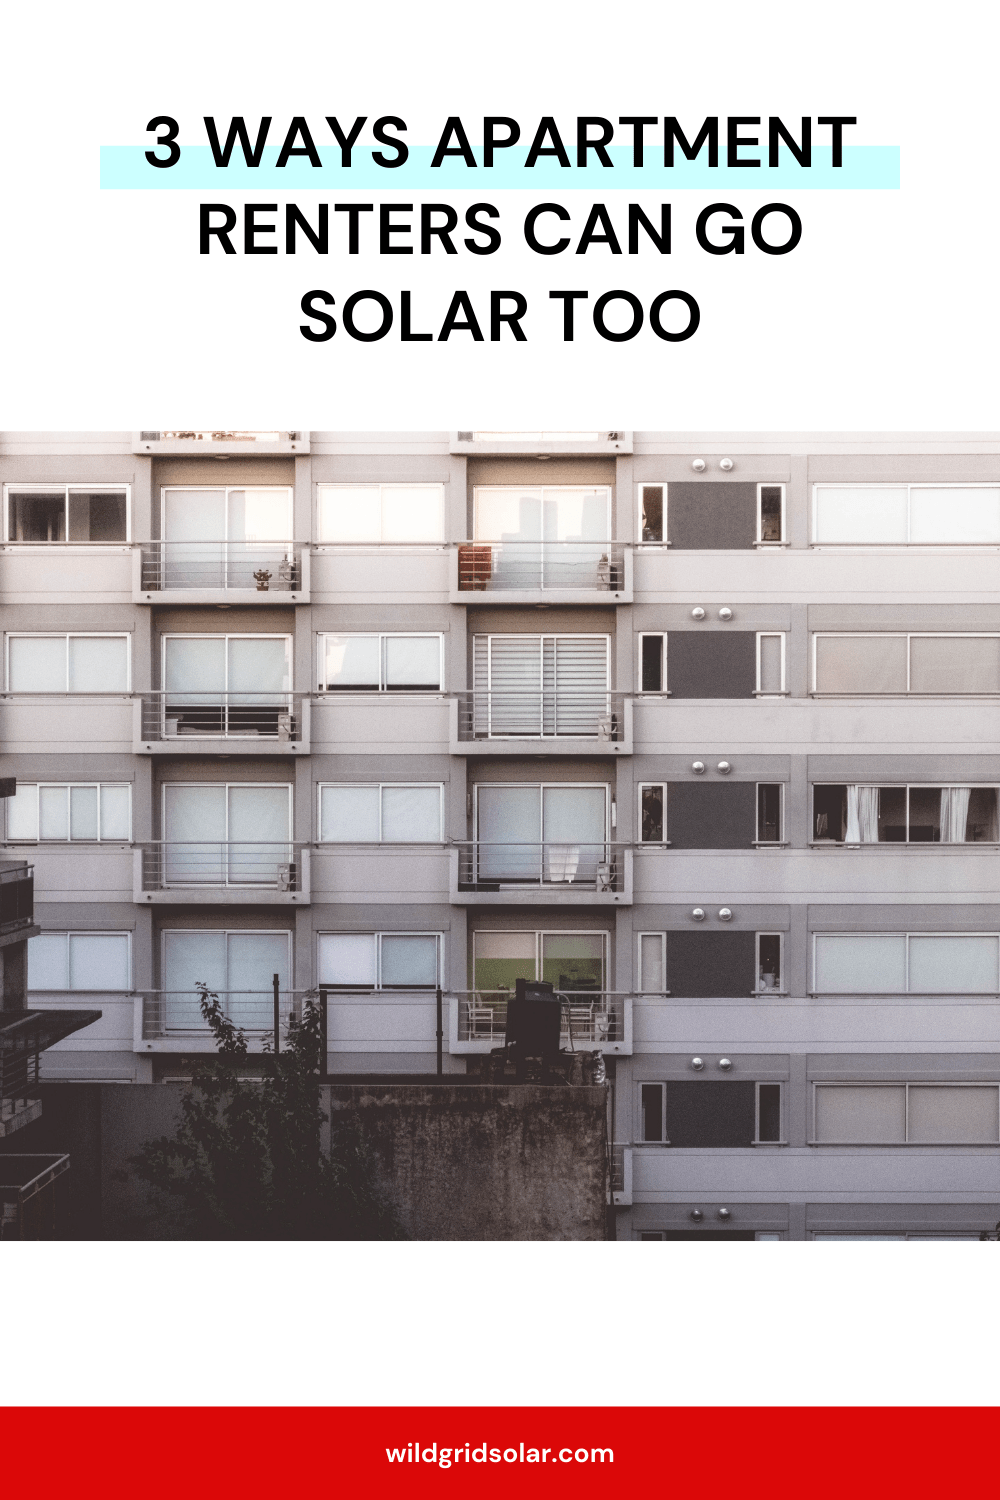 3 ways apartment renters can go solar too.  Picture of an apartment building.